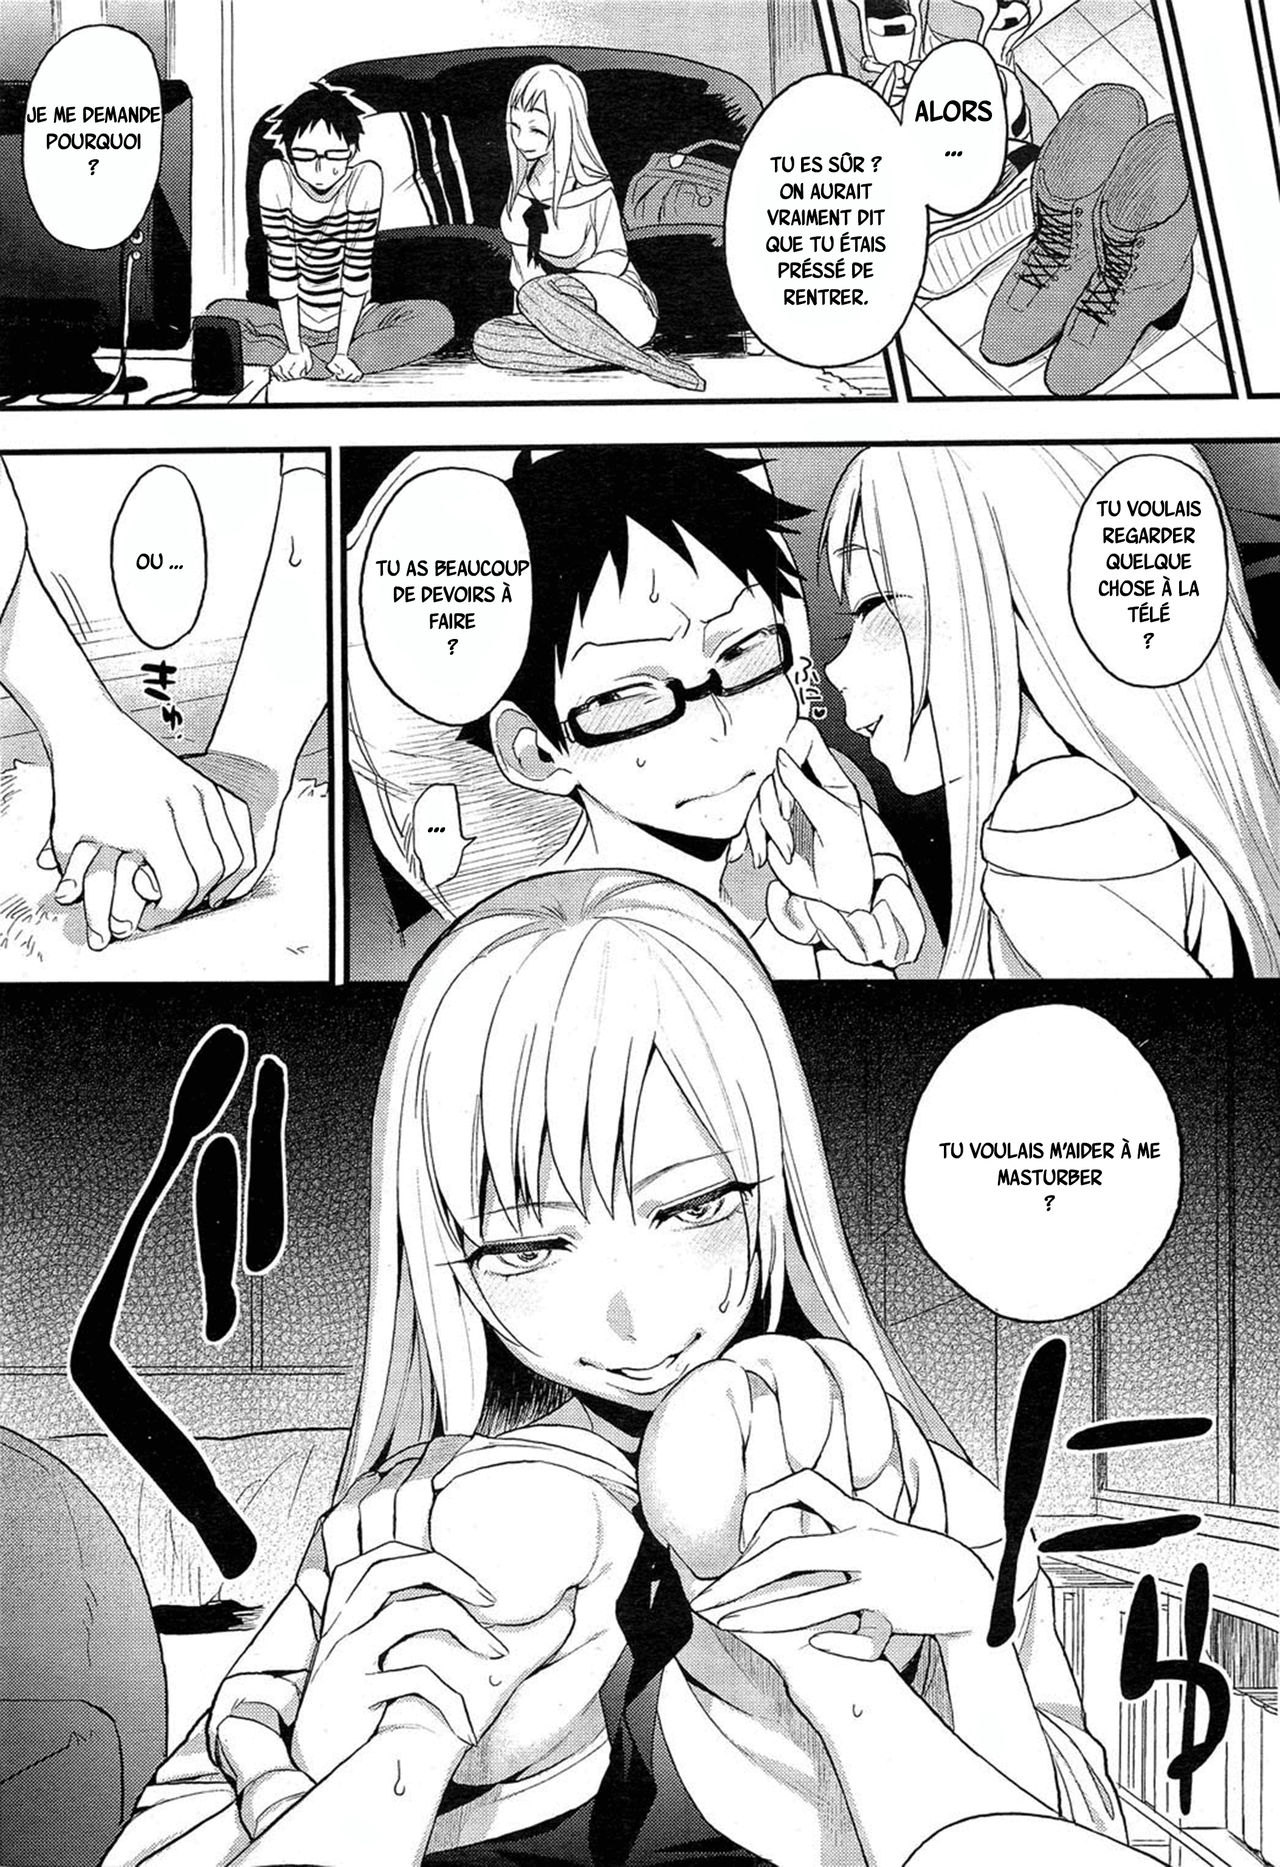 [Igumox] Omocha-kun to Onee-san | A Young Lady And Her Little Toy (COMIC HOTMiLK 2012-12) [French] 2